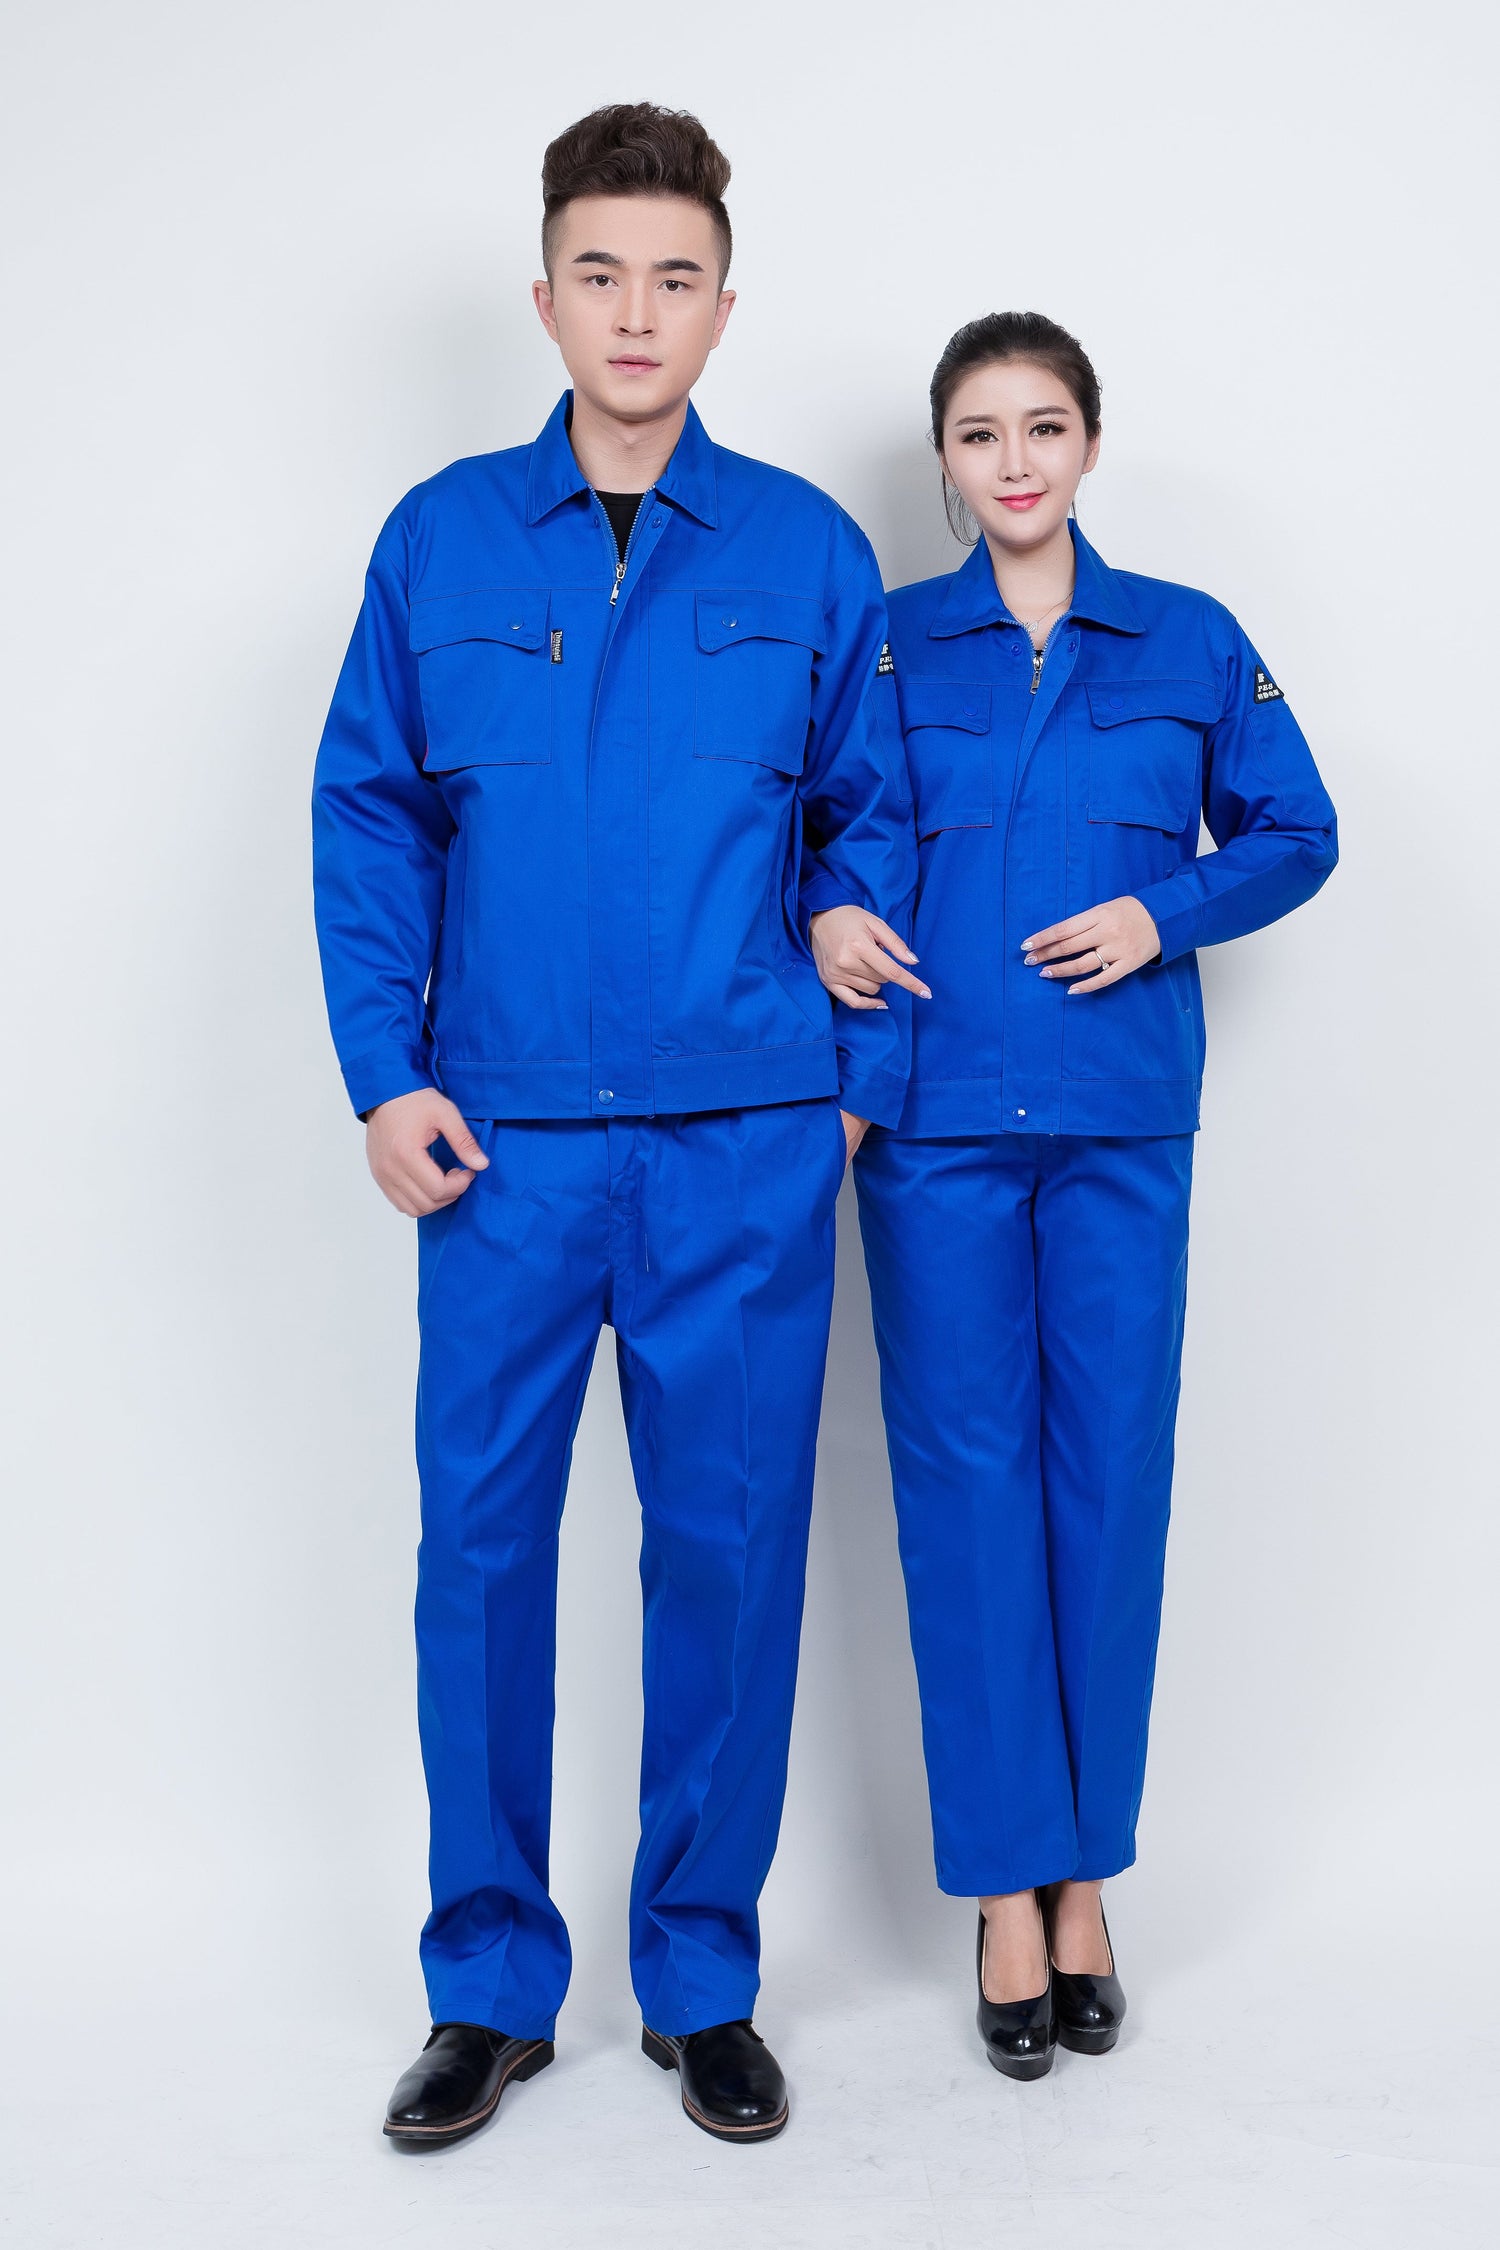 Corals Trading Co. 可樂思百貨商行 纯棉 Spring and Autumn style long-sleeved anti-static work clothes series SD-AS-W702